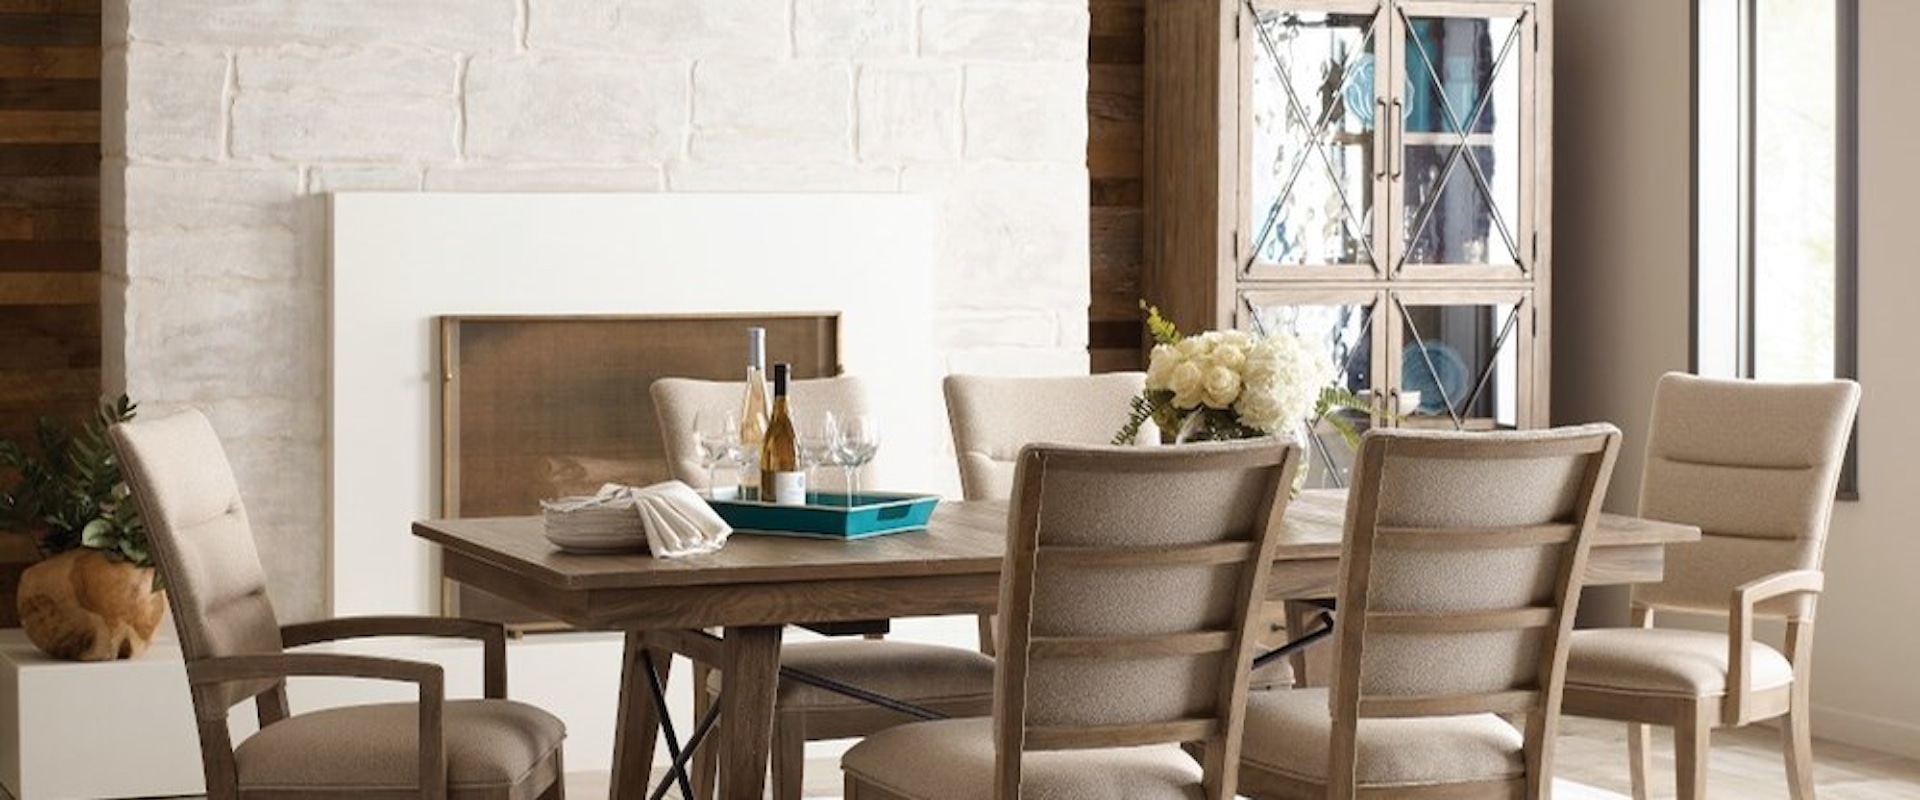 7-Piece Laredo Dining Set with Upholstered Chairs